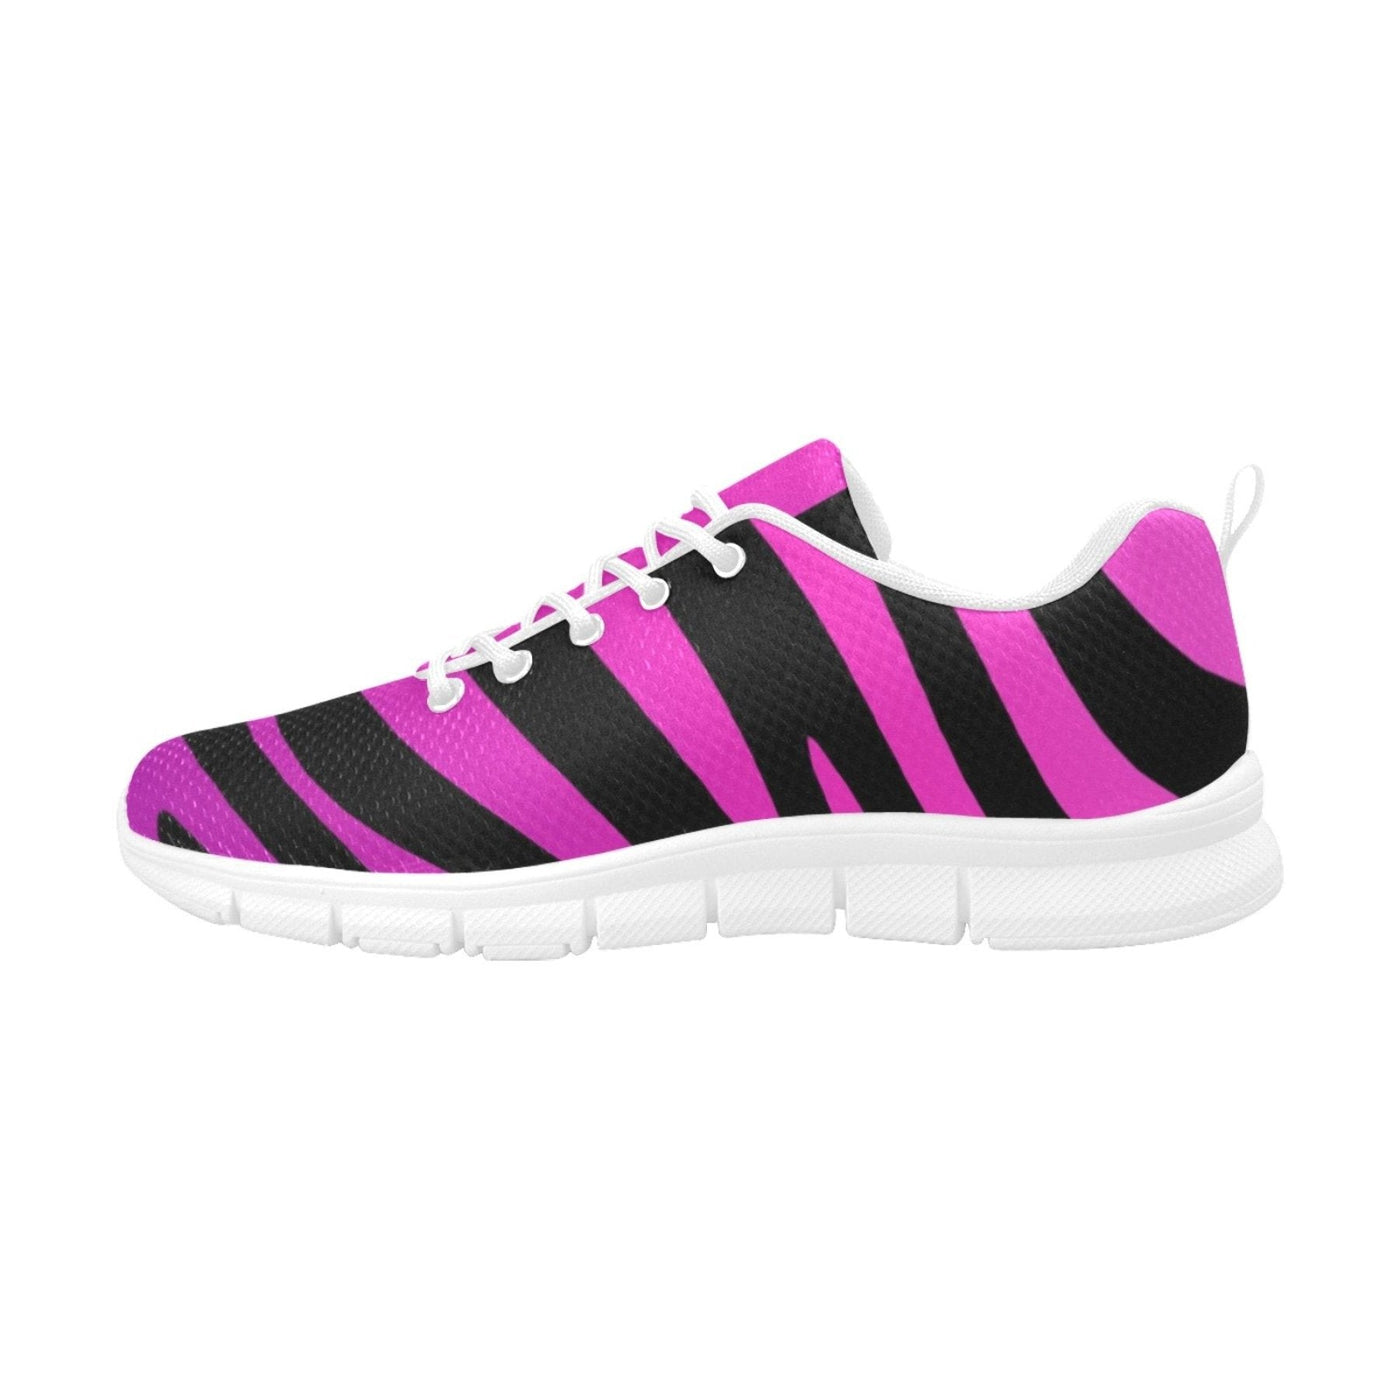 Womens Sneakers Black Strip And Purple Running Shoes - Womens | Sneakers |